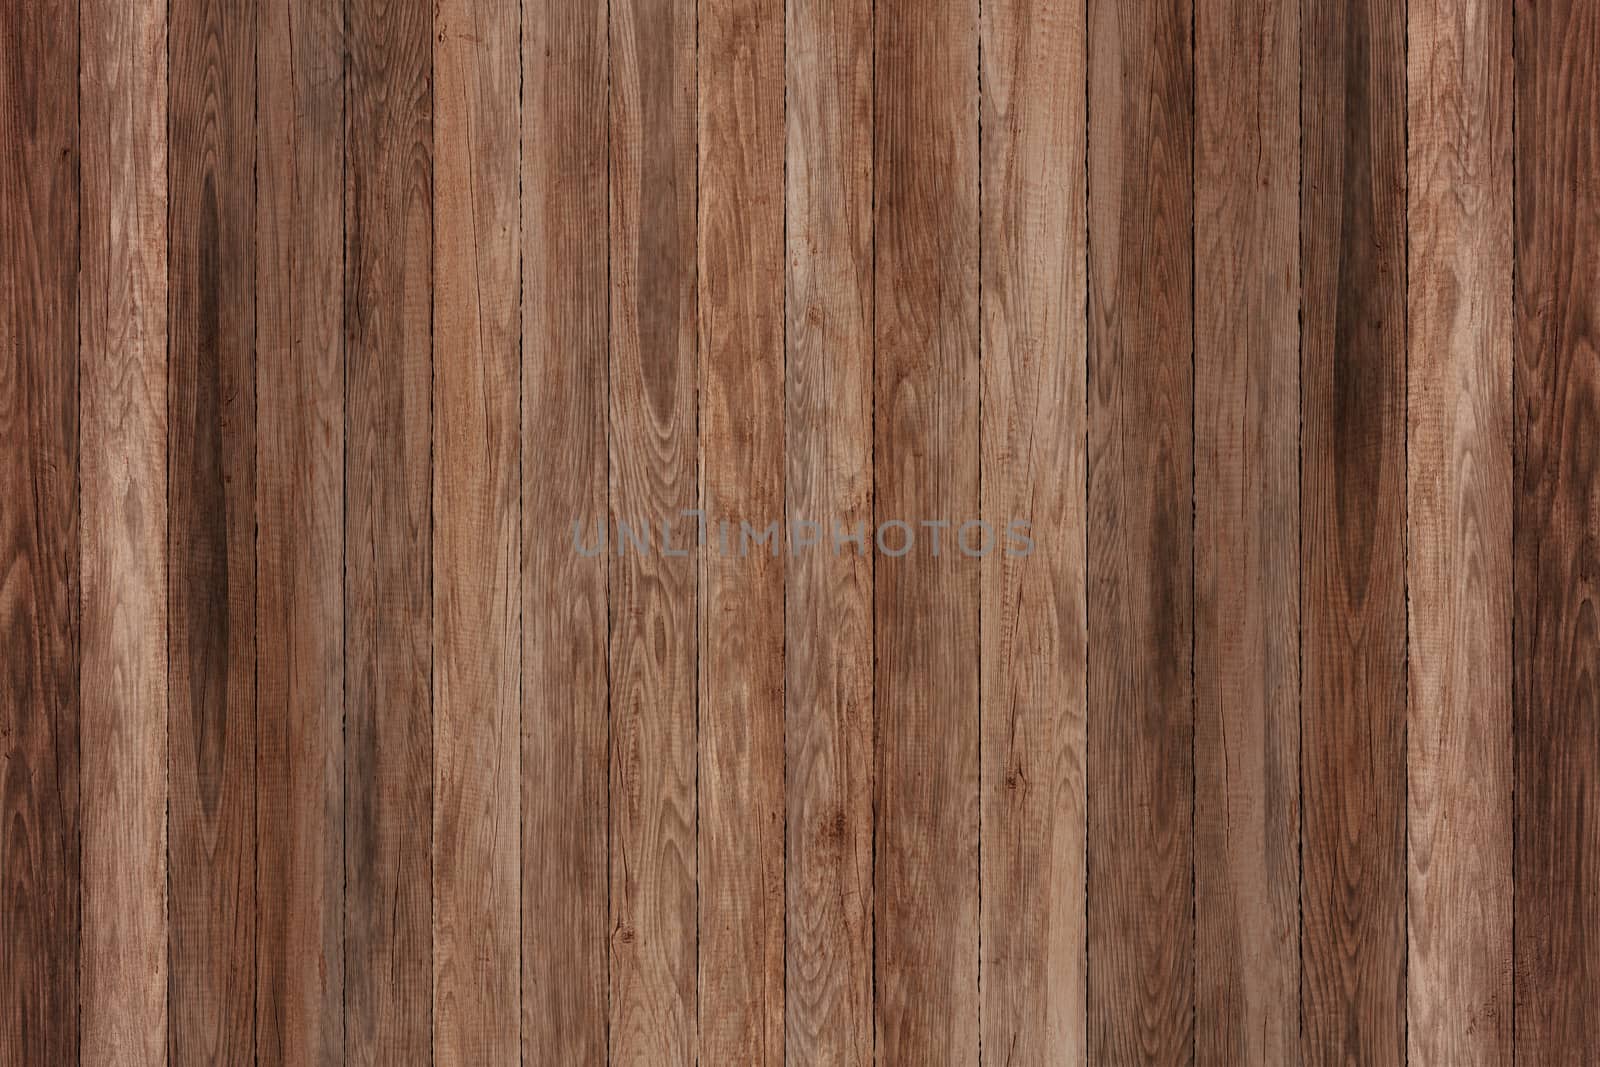 Grunge wood panels. Planks Background. Old wall wooden vintage floor by ivo_13